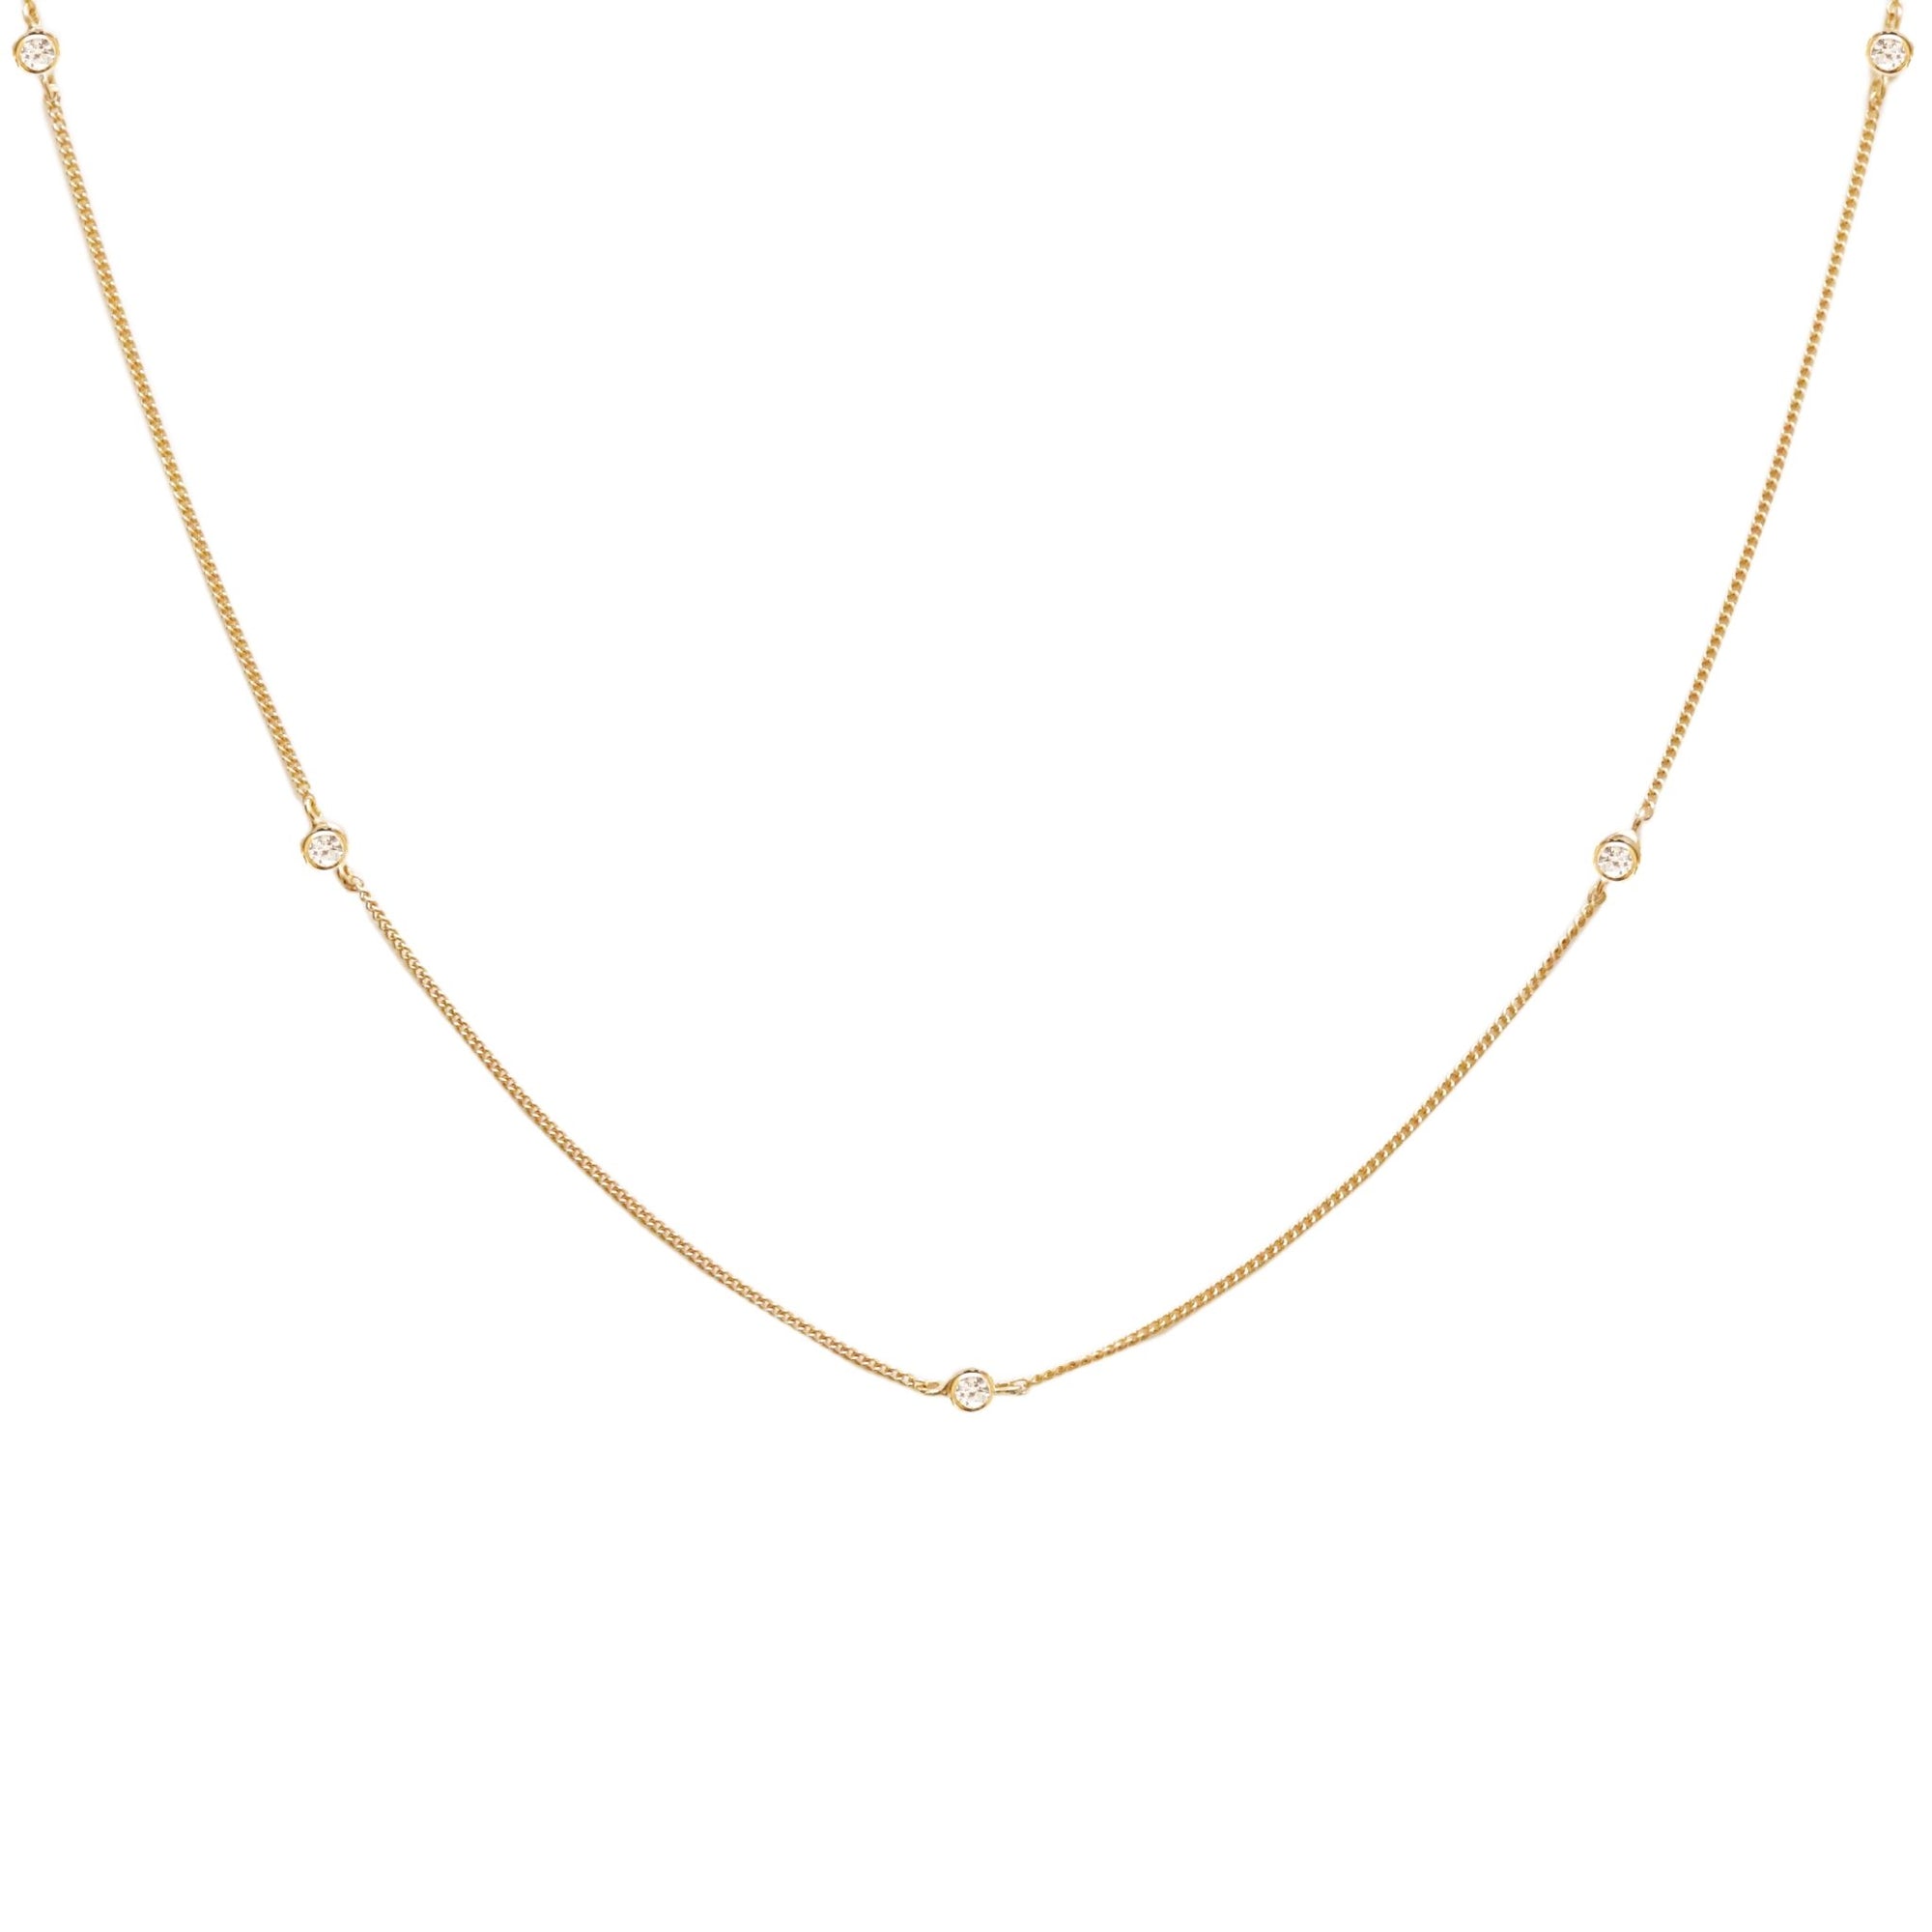 Tiny Love Necklace - Cubic Zirconia & Gold - SO PRETTY CARA COTTER